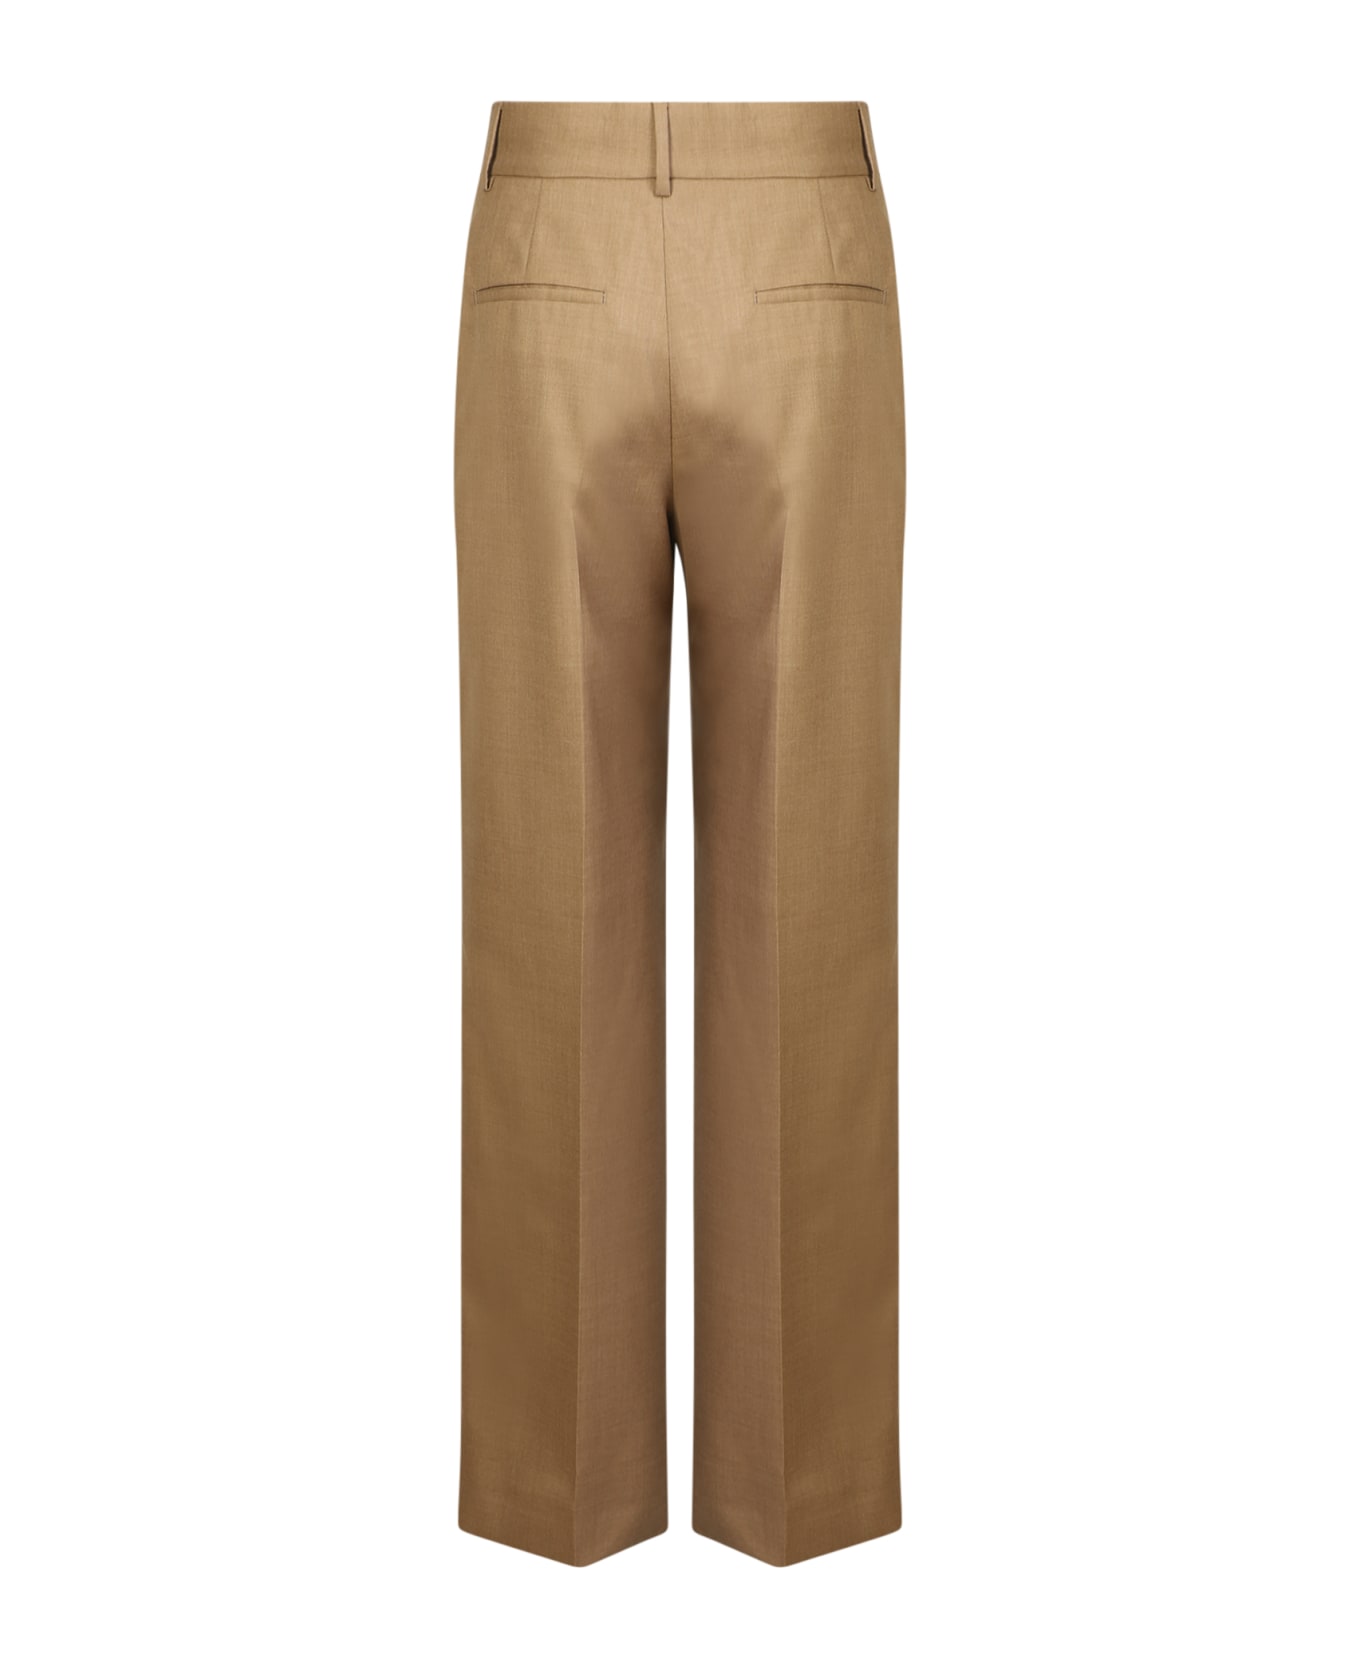 Burberry Wide-leg Tailored Trousers - Beige